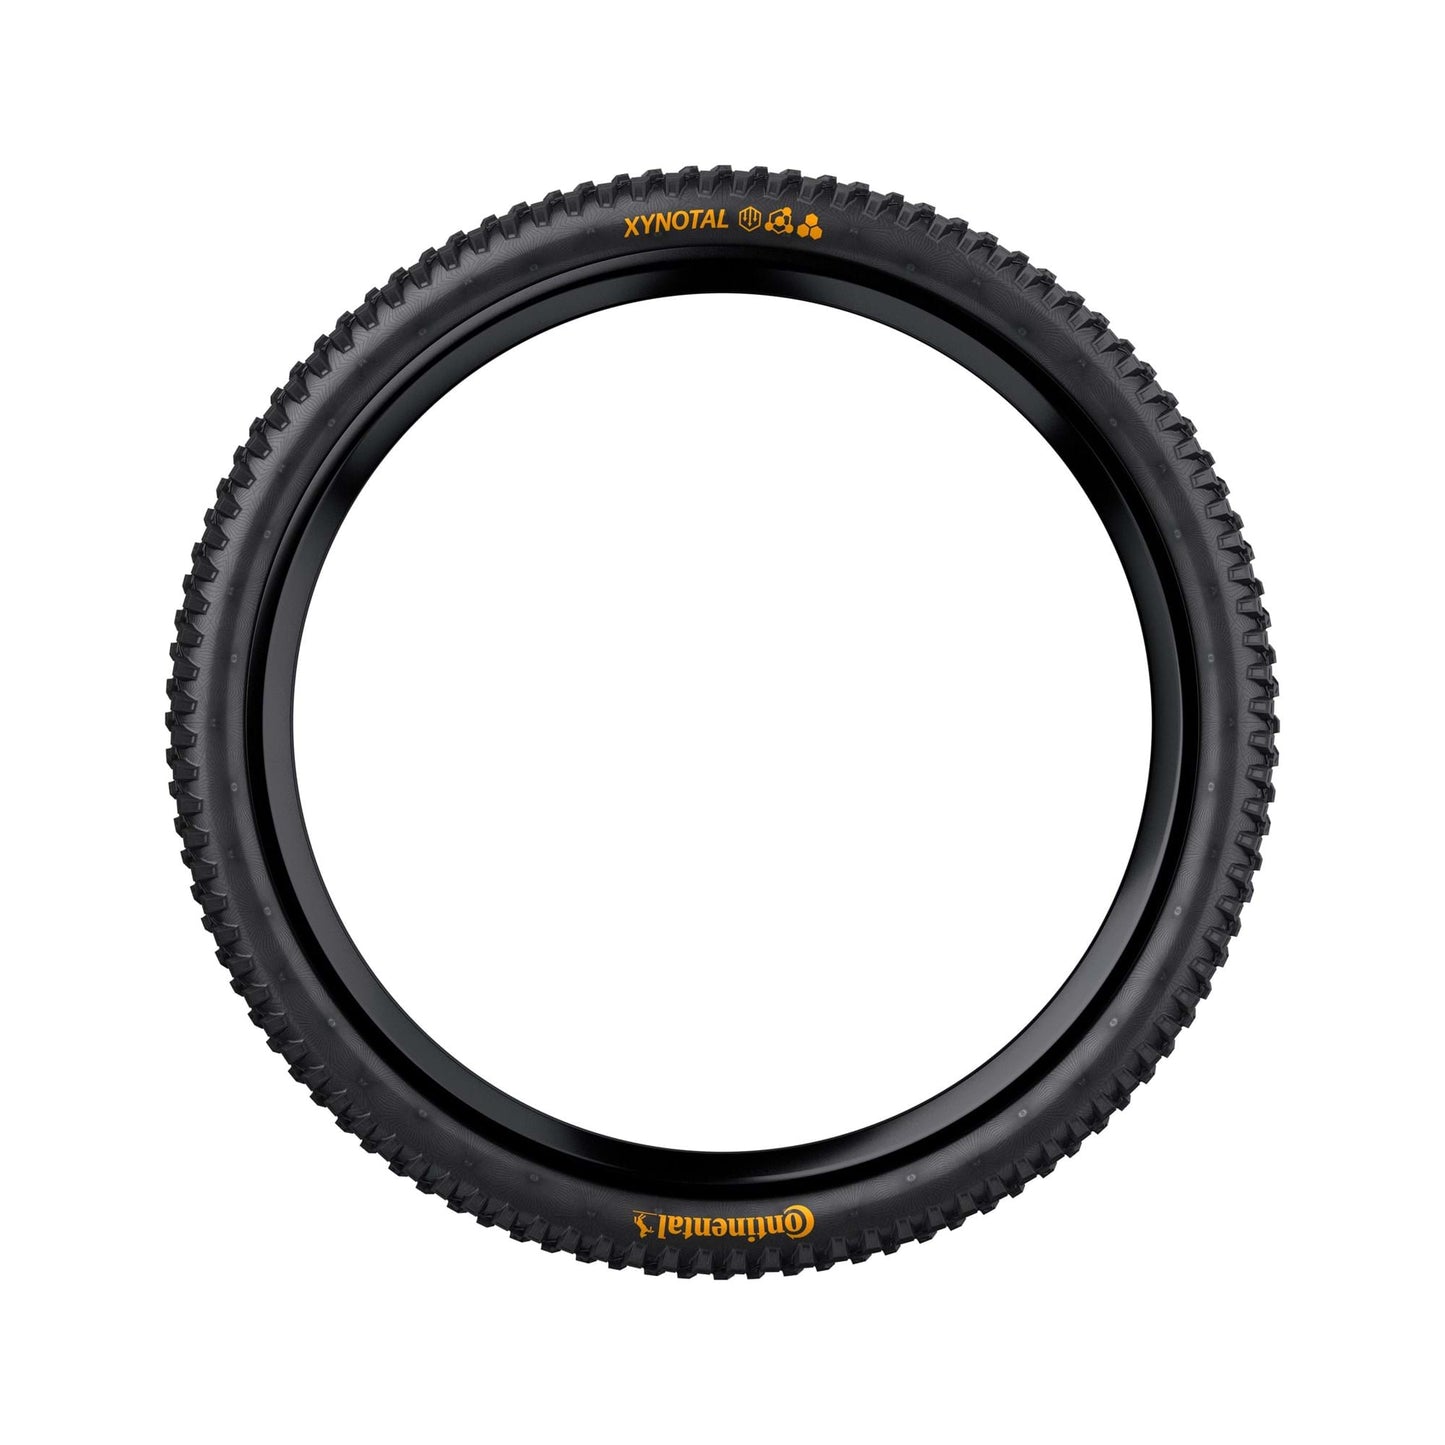 CONTINENTAL XYNOTAL DOWNHILL 29X2.40" SOFT FOLDING TYRE